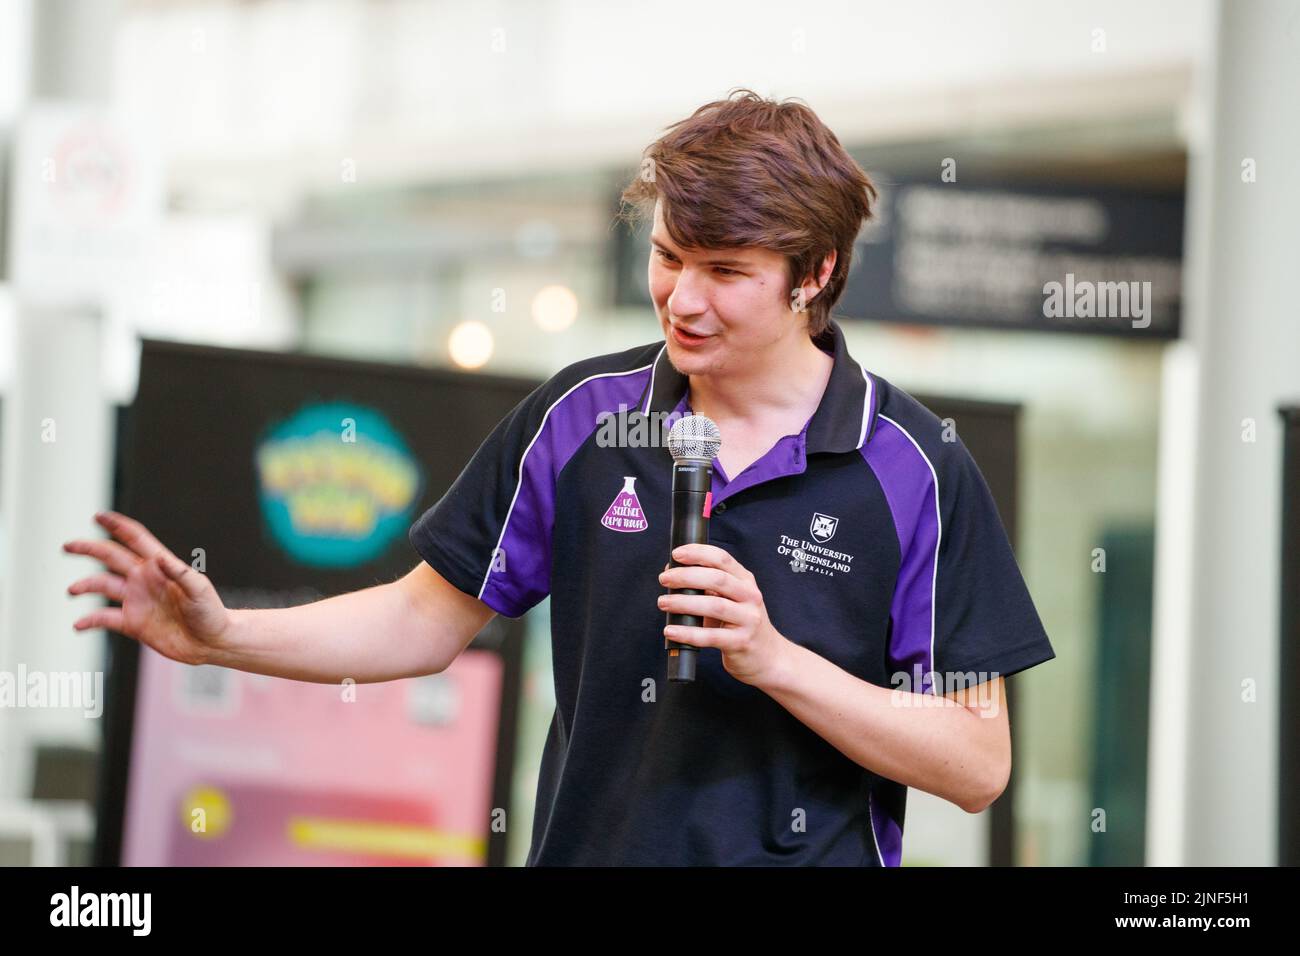 Brisbane, Australia. 11th Aug, 2022. Members of the University of Queensland's Science Demo Troupe present live experiments to an audience of school students and the public in Brisbane's Queen Street Mall on 11 August 2022. Live experiments and museum specimen displays were performed in Brisbane's Queen Street Mall for the launch of National Science Week. National Science Week was established in 1997 to acknowledge the contributions of Australian scientists and technology. (Photo by Joshua Prieto/Sipa USA) Credit: Sipa USA/Alamy Live News Stock Photo